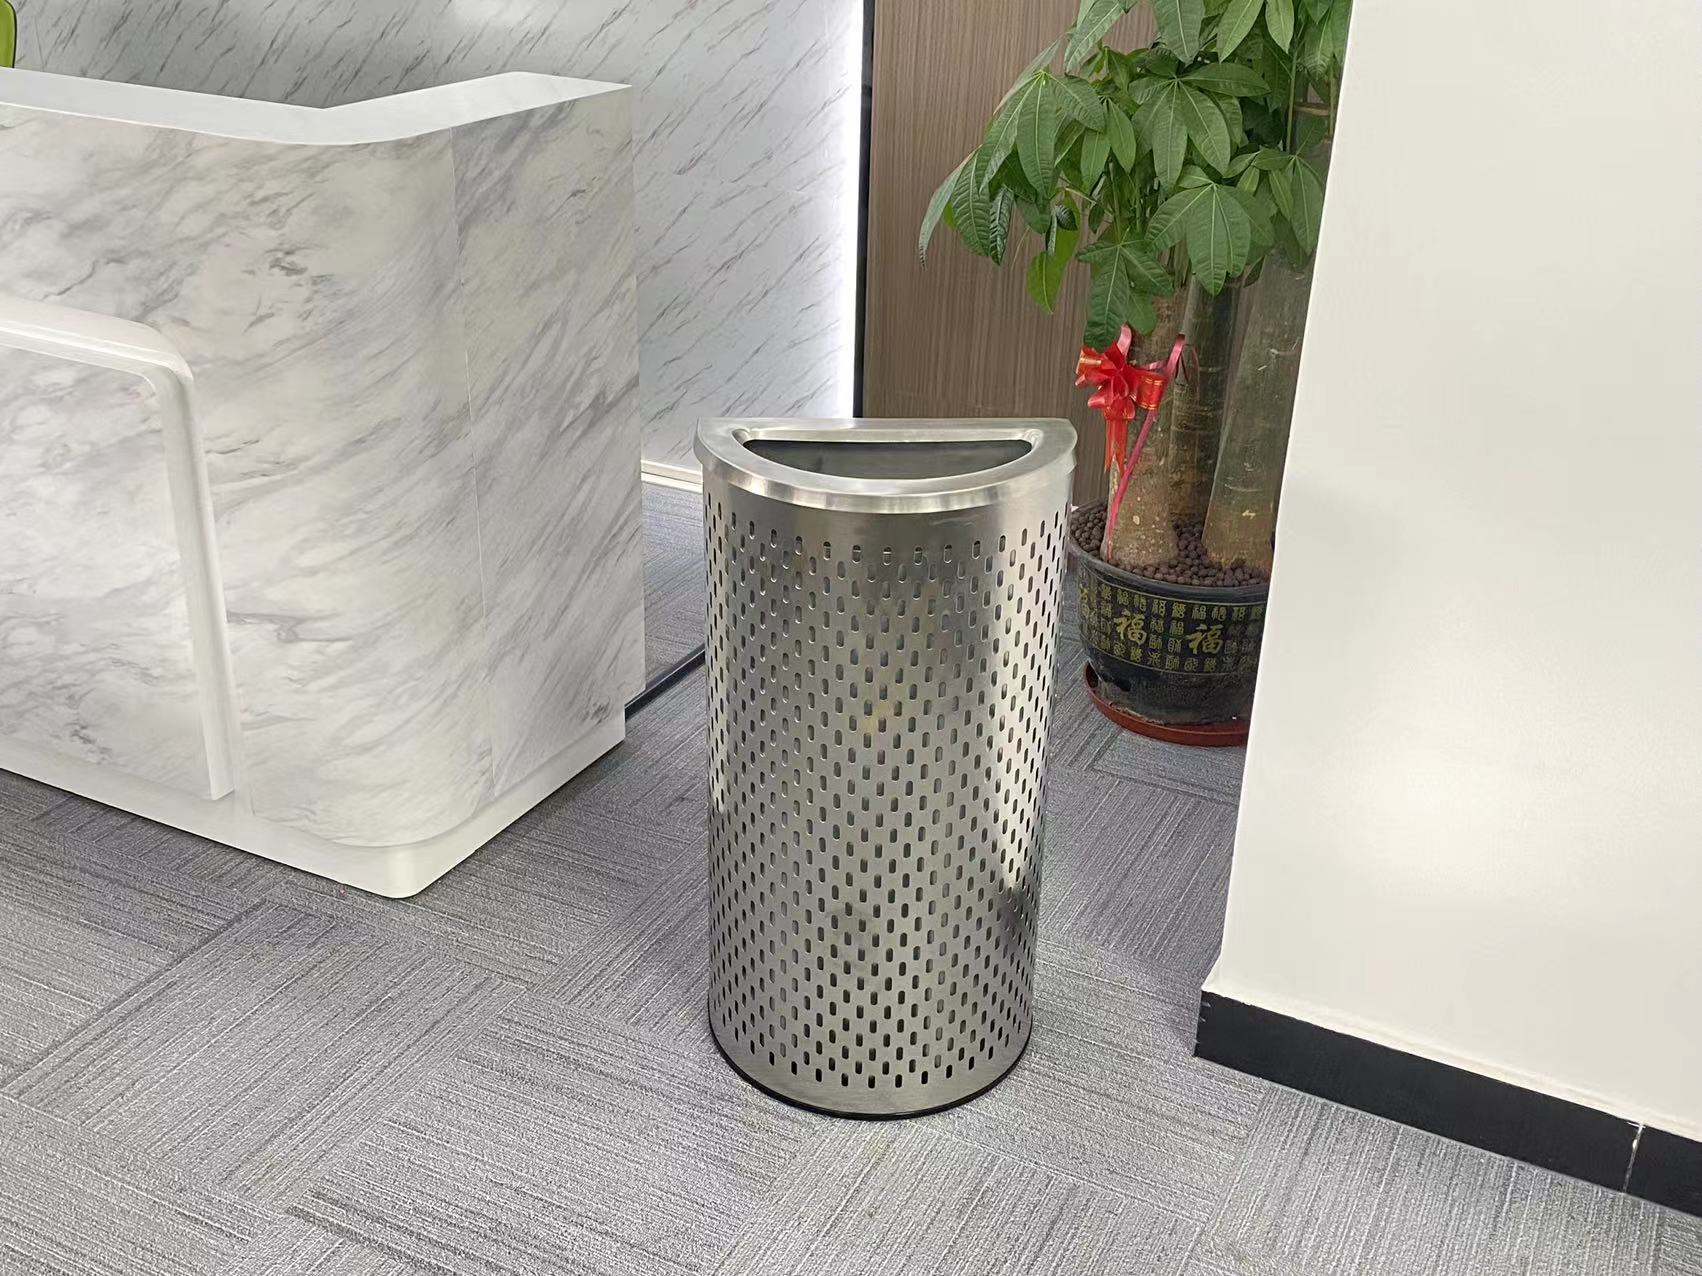 Half Circle Stainlss Steel Trash Can for Hotel (YH-515)